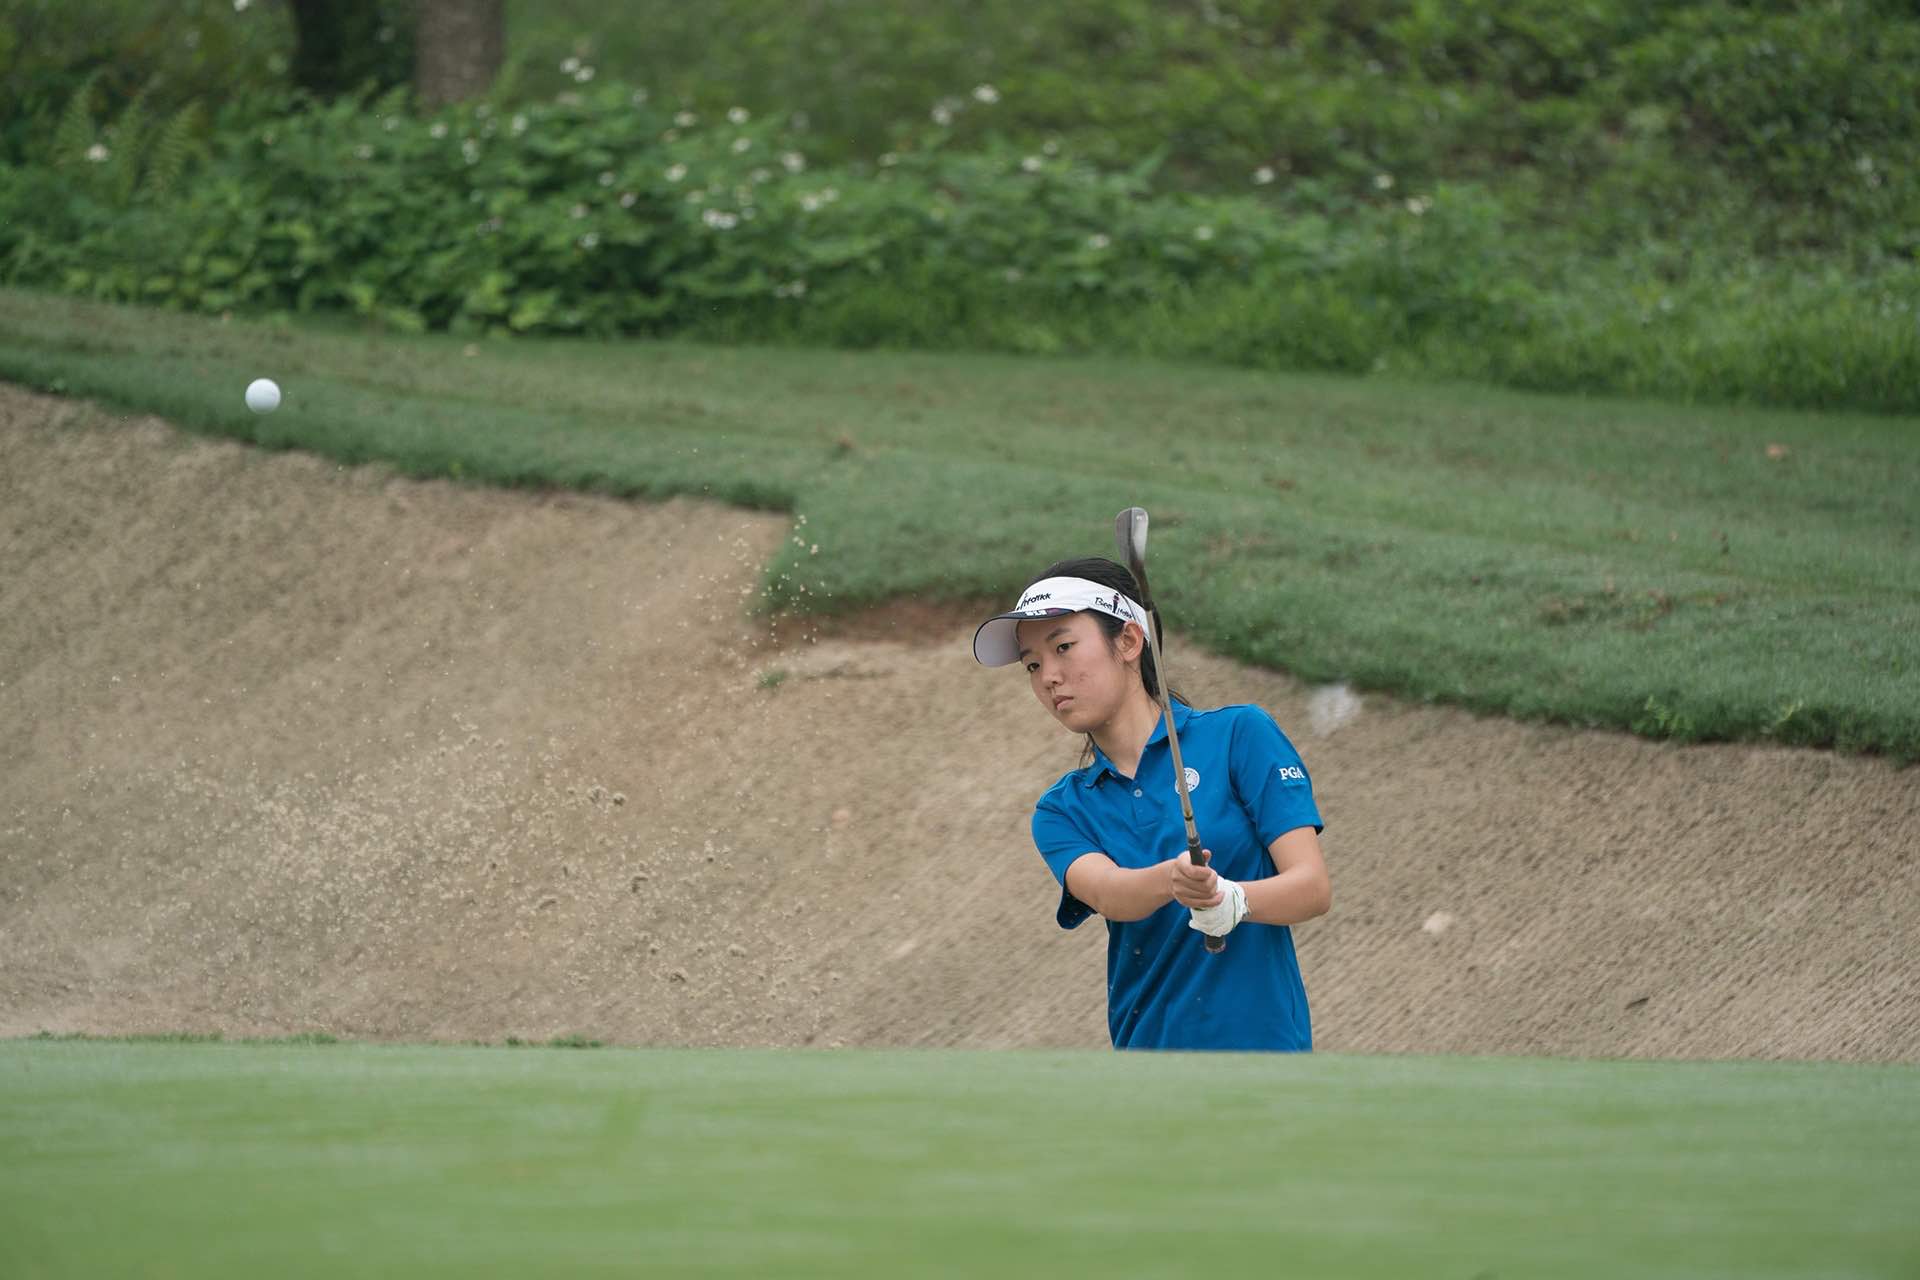 Yulin Chen, First Team Junior All-Asia, Hitting a Bunker Shot at The Southern Junior